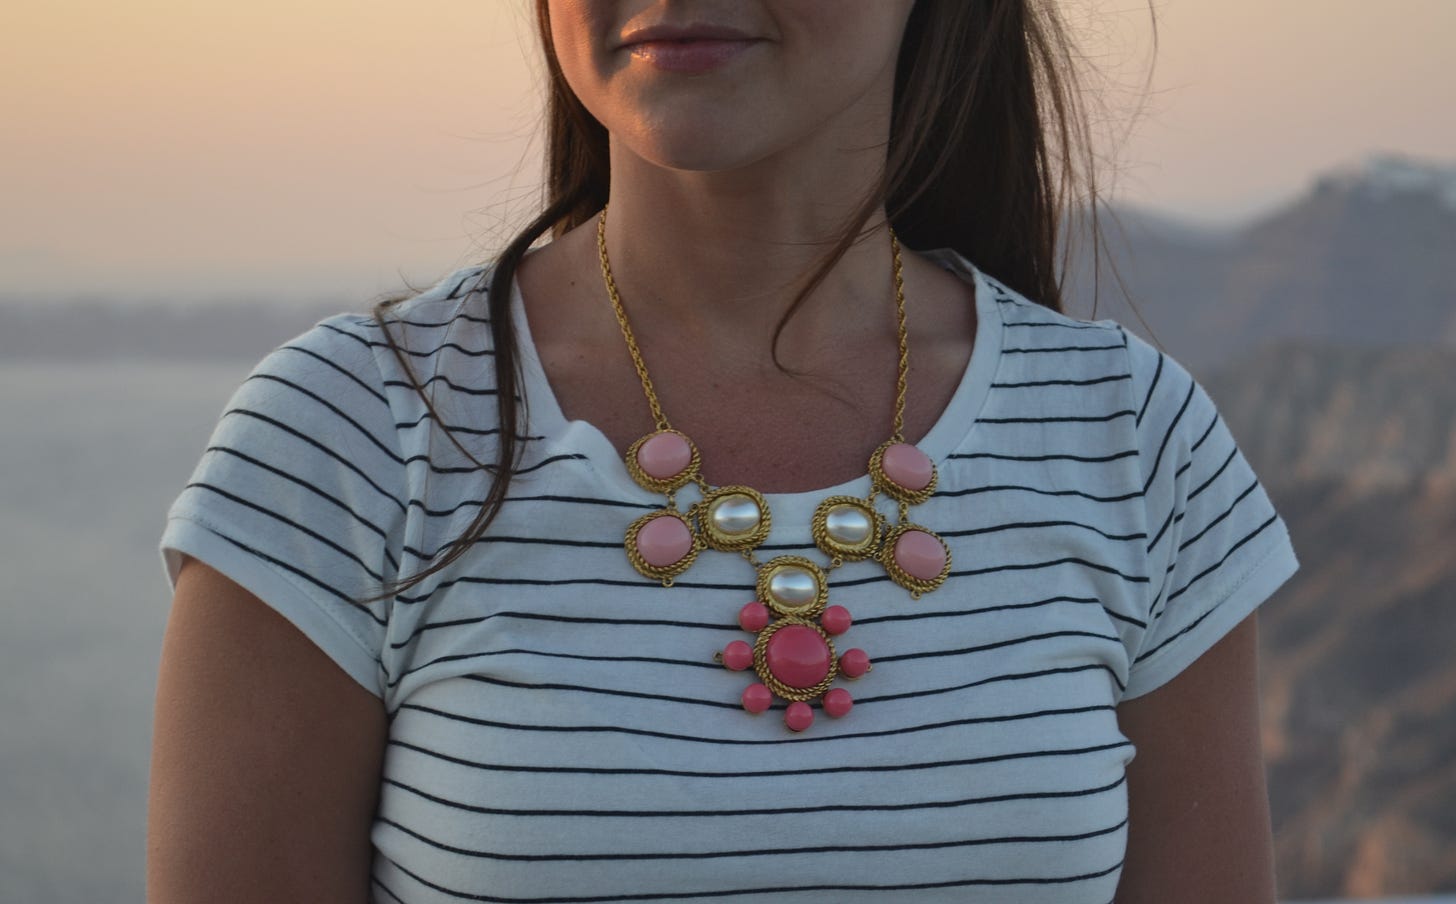 Photo of woman in a striped T-shirt and a truly heinous pink Kendra Scott necklace that resembles a chemical compound or perhaps an outbreak of warts.